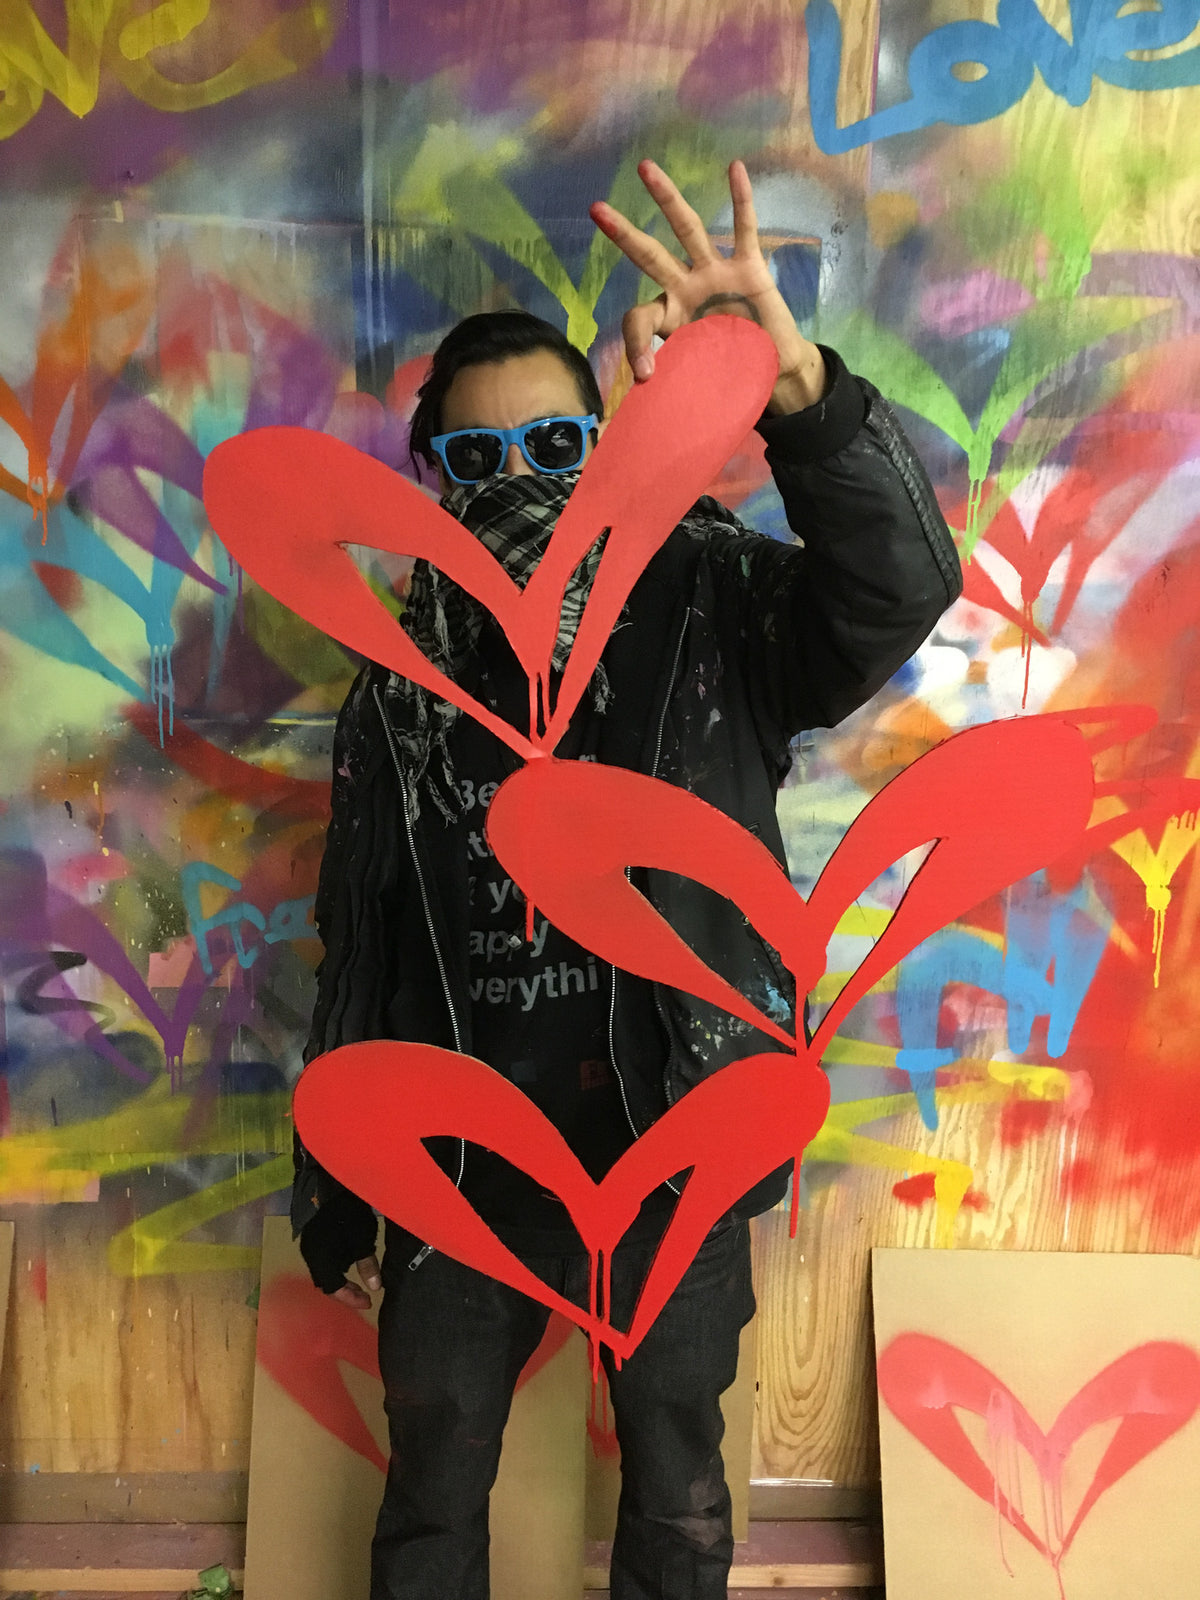 Free Humanity &quot;Red Heart - Single&quot; - Hand-Painted Cardboard Cut Out